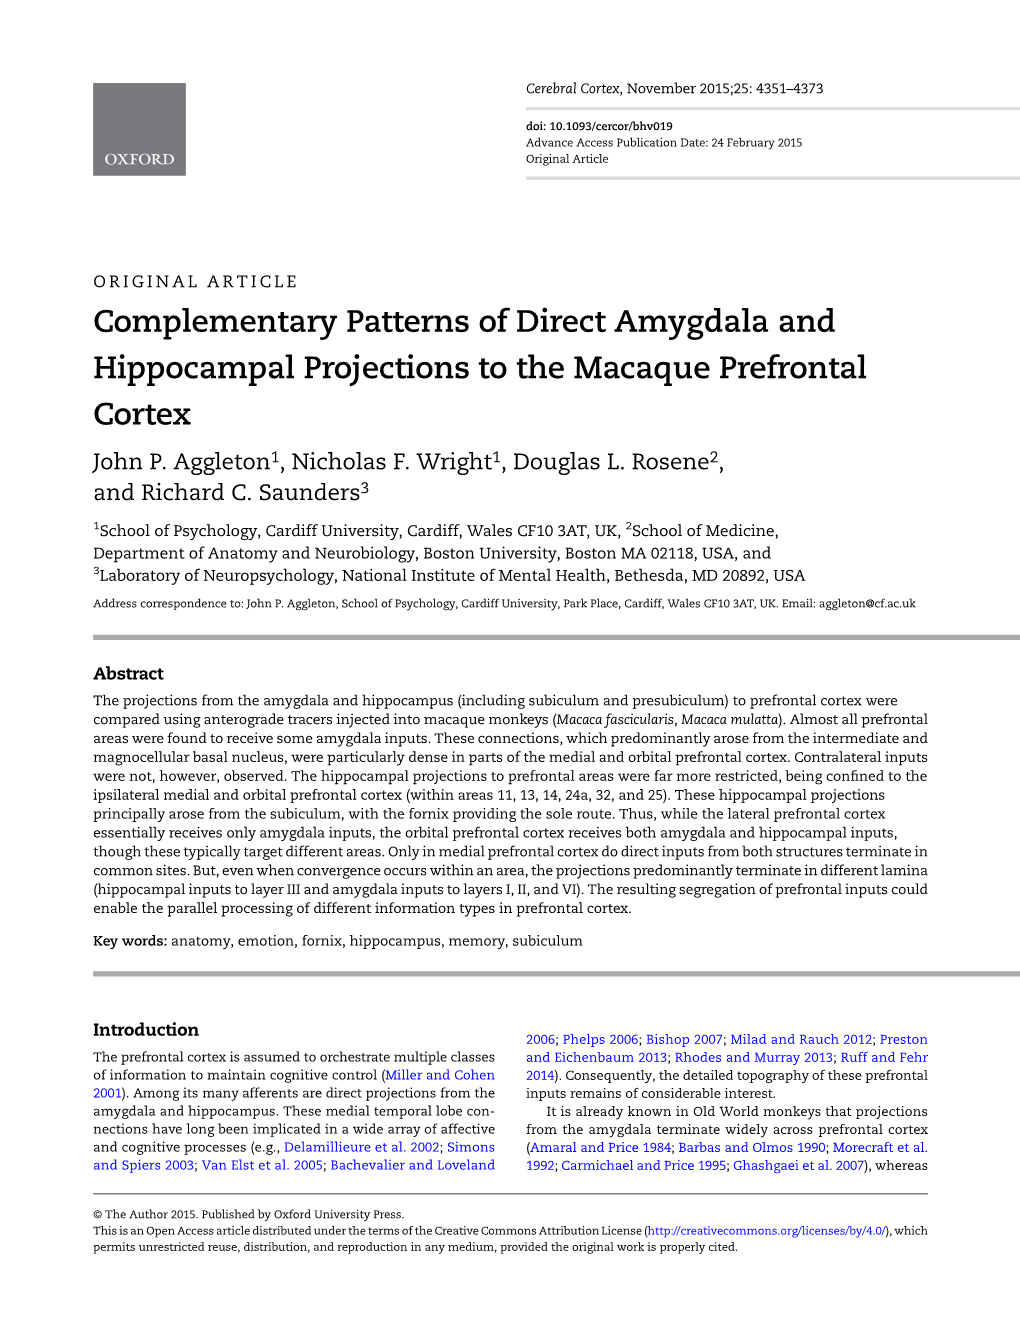 Complementary Patterns of Direct Amygdala and Hippocampal Projections to the Macaque Prefrontal Cortex John P